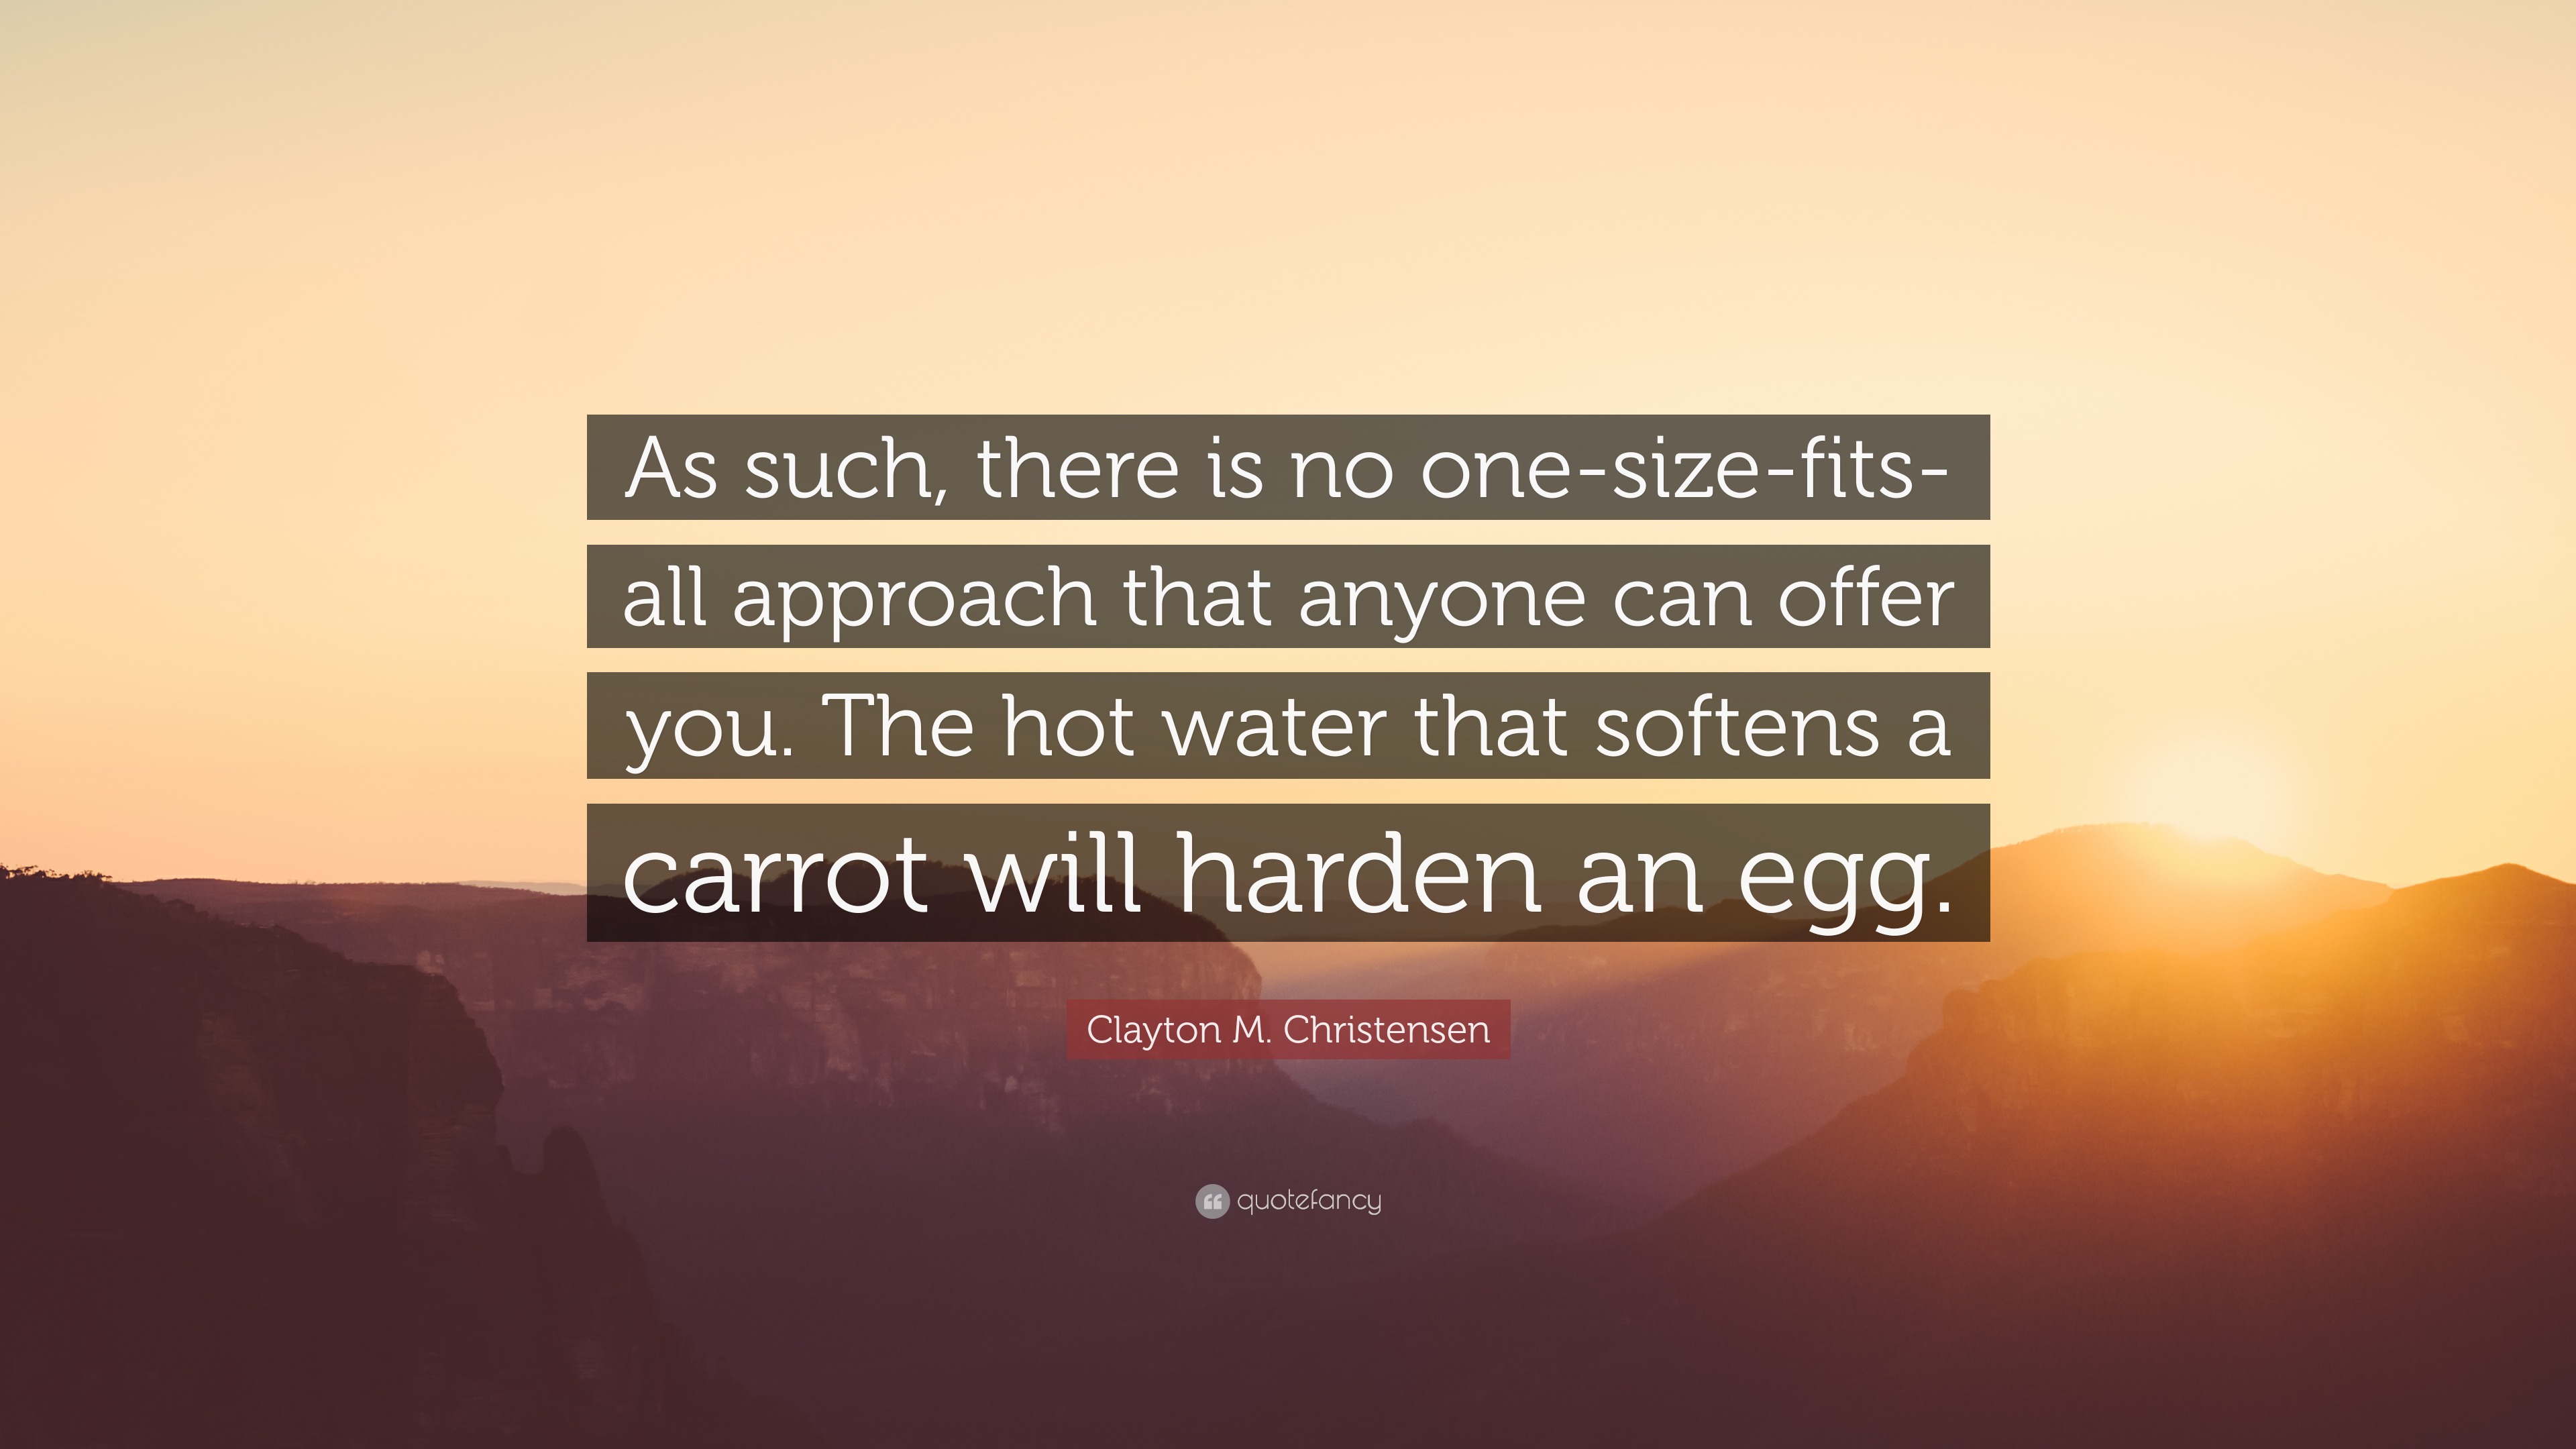 Clayton M. Christensen Quote: “As such, there is no one-size-fits-all  approach that anyone can offer you. The hot water that softens a carrot  will hard”